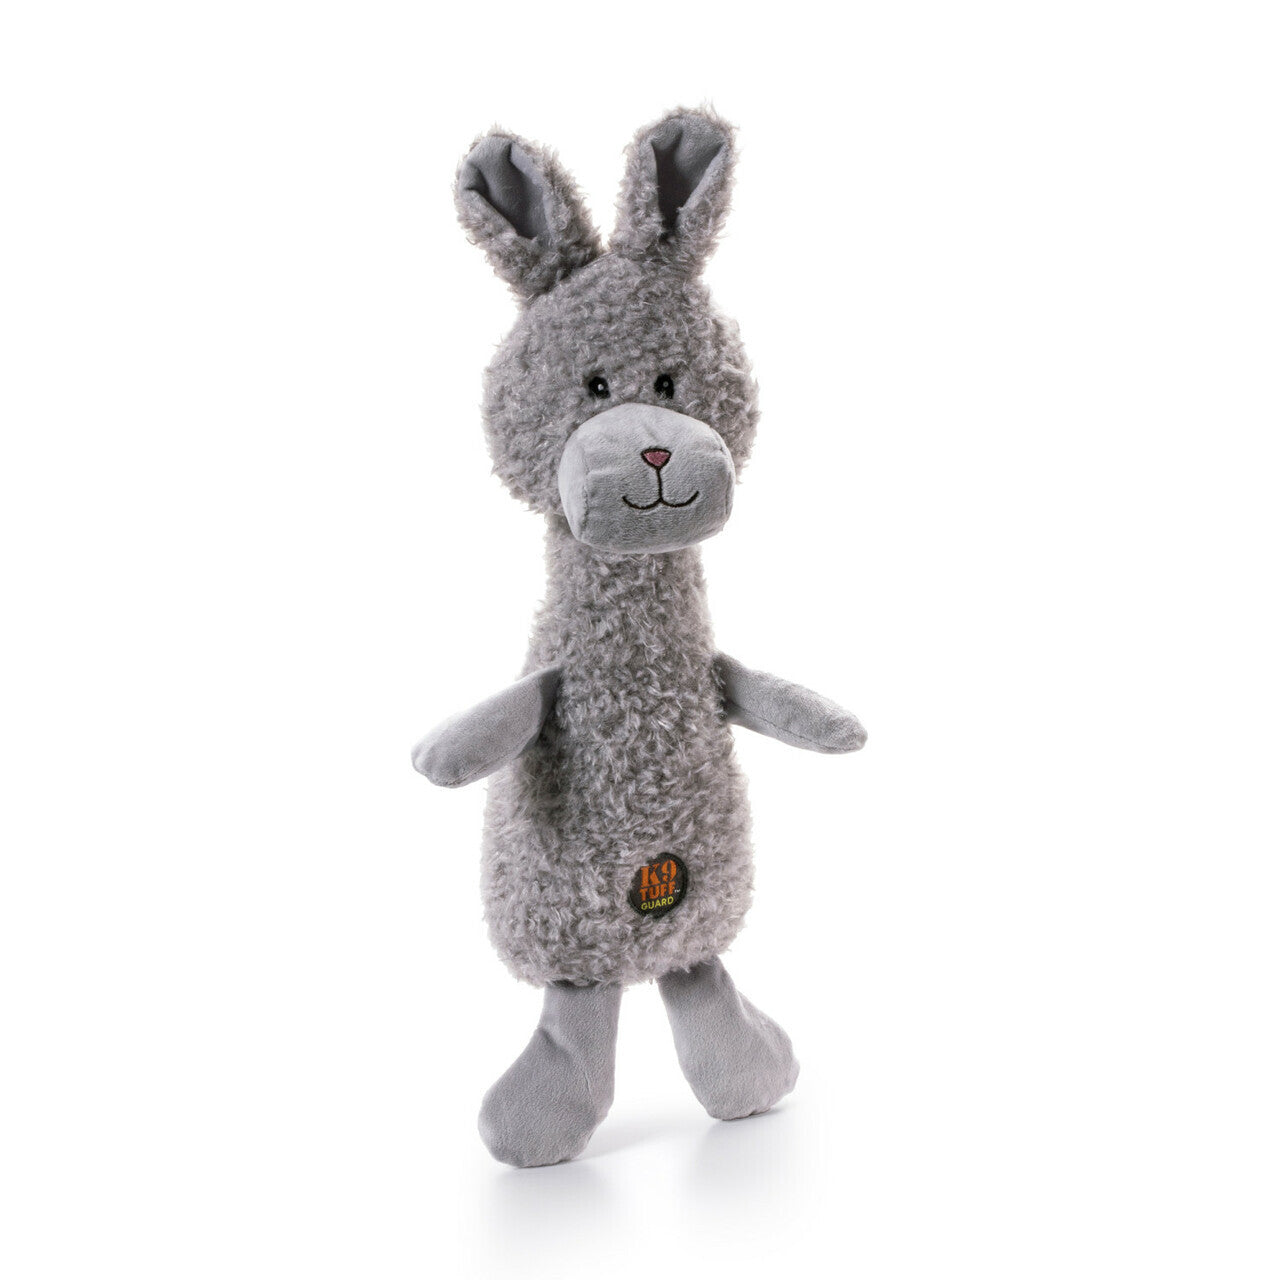 Charming Pet Scruffles Textured Squeaker Dog Toy - Bunny - Small